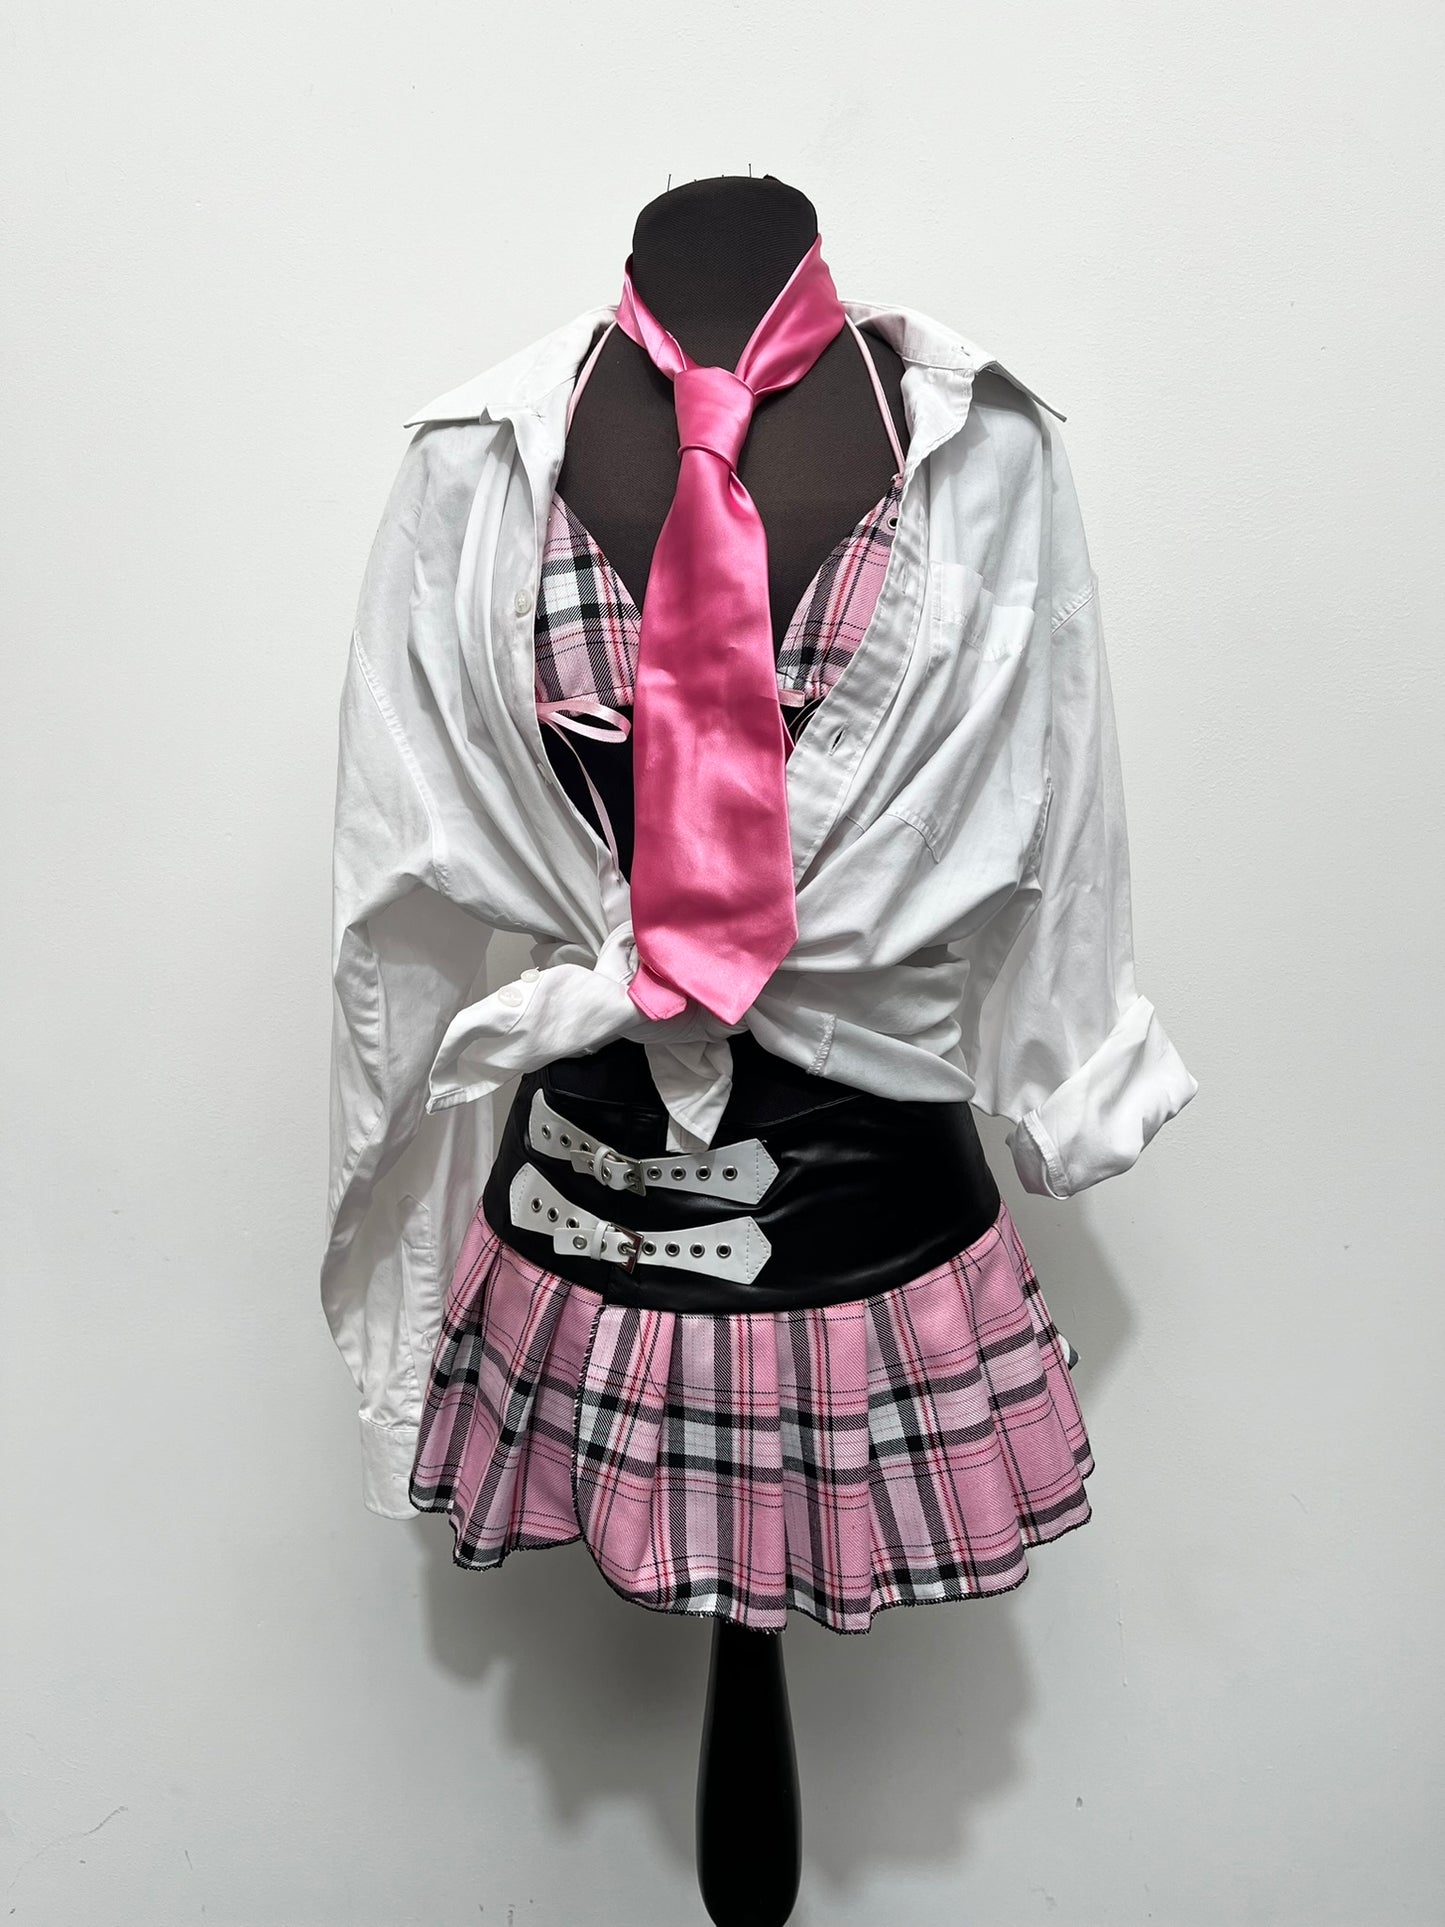 Sexy School Girl Outfit Size S/M - Ex Hire